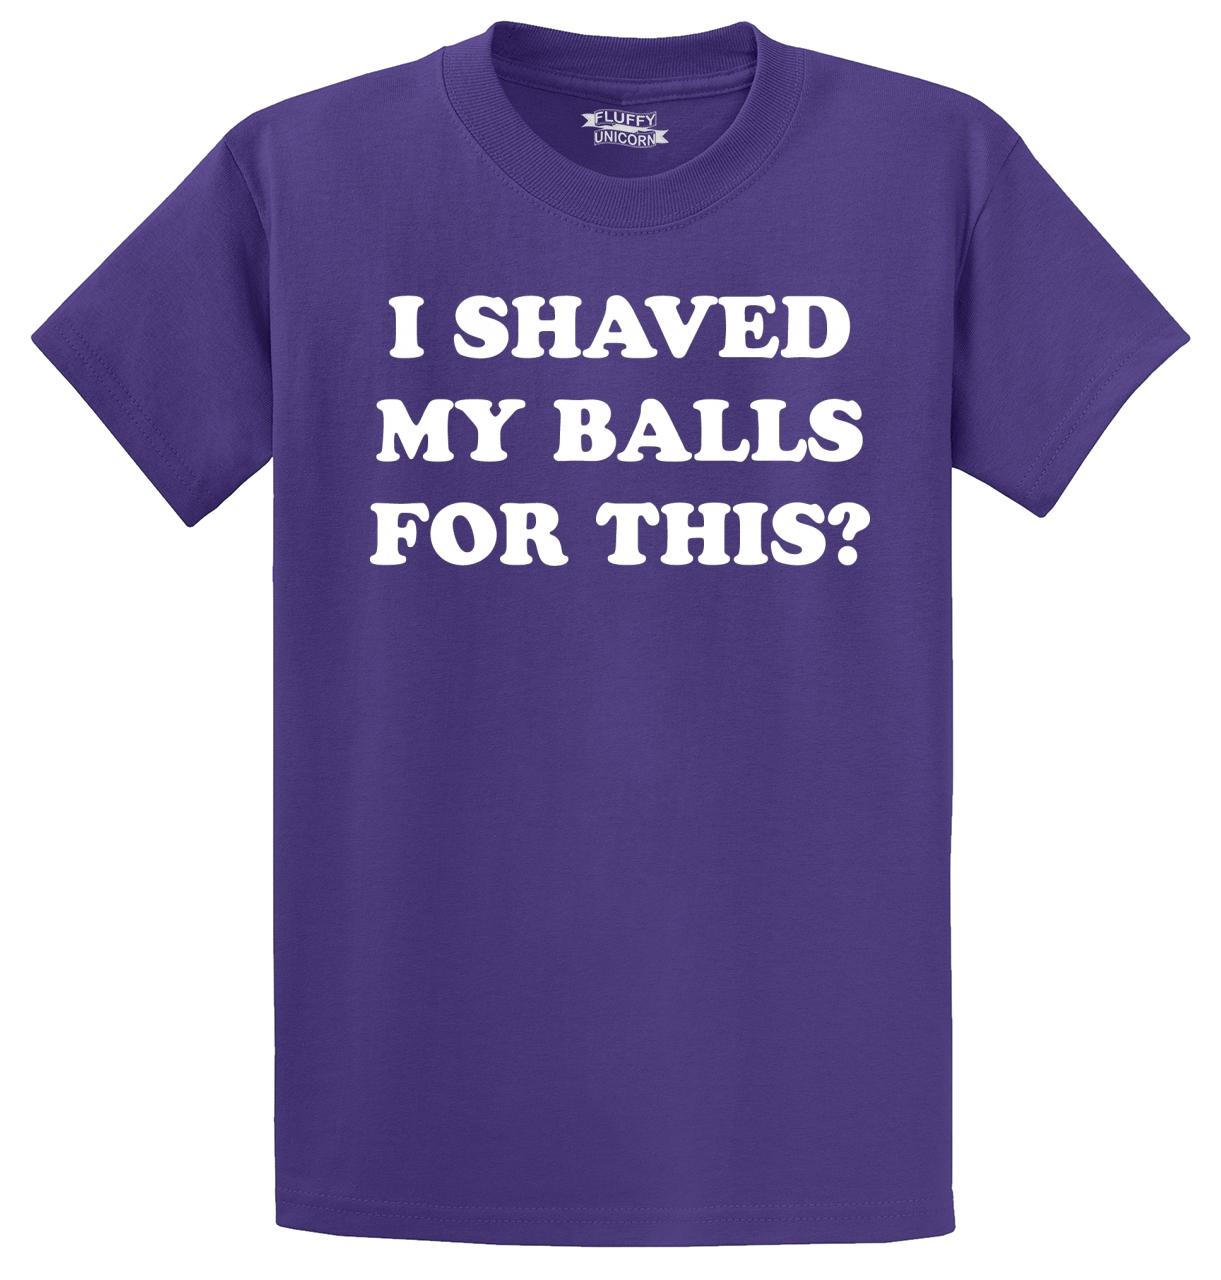 I Shaved My Balls For This Funny T Shirt Adult Humor Rude Sex